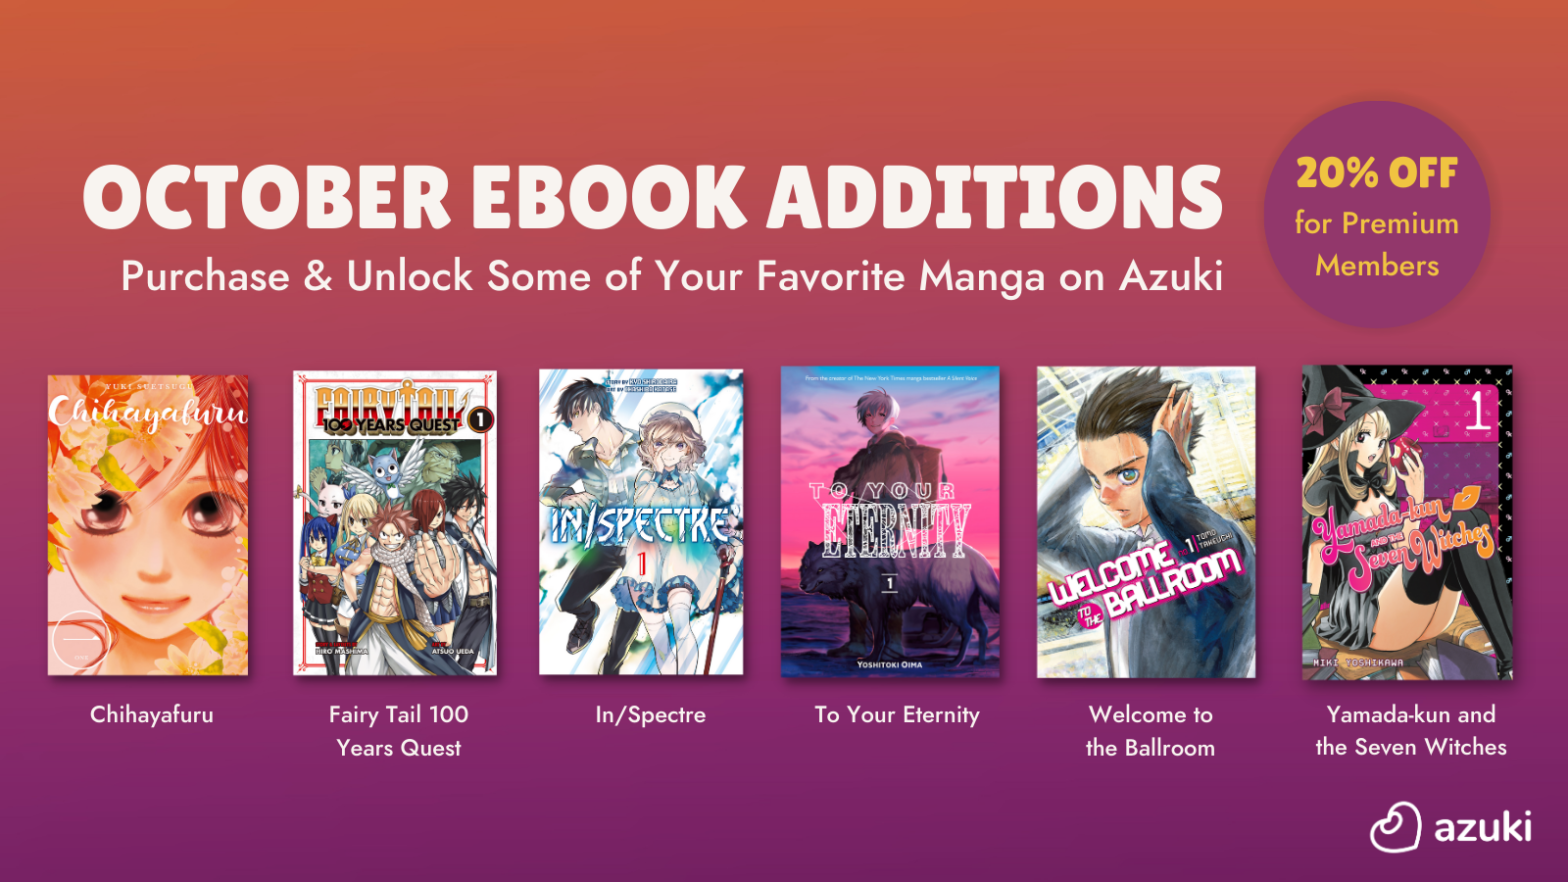 October eBook Additions Purchase & Unlock Some of Your Favorite Manga on Azuki